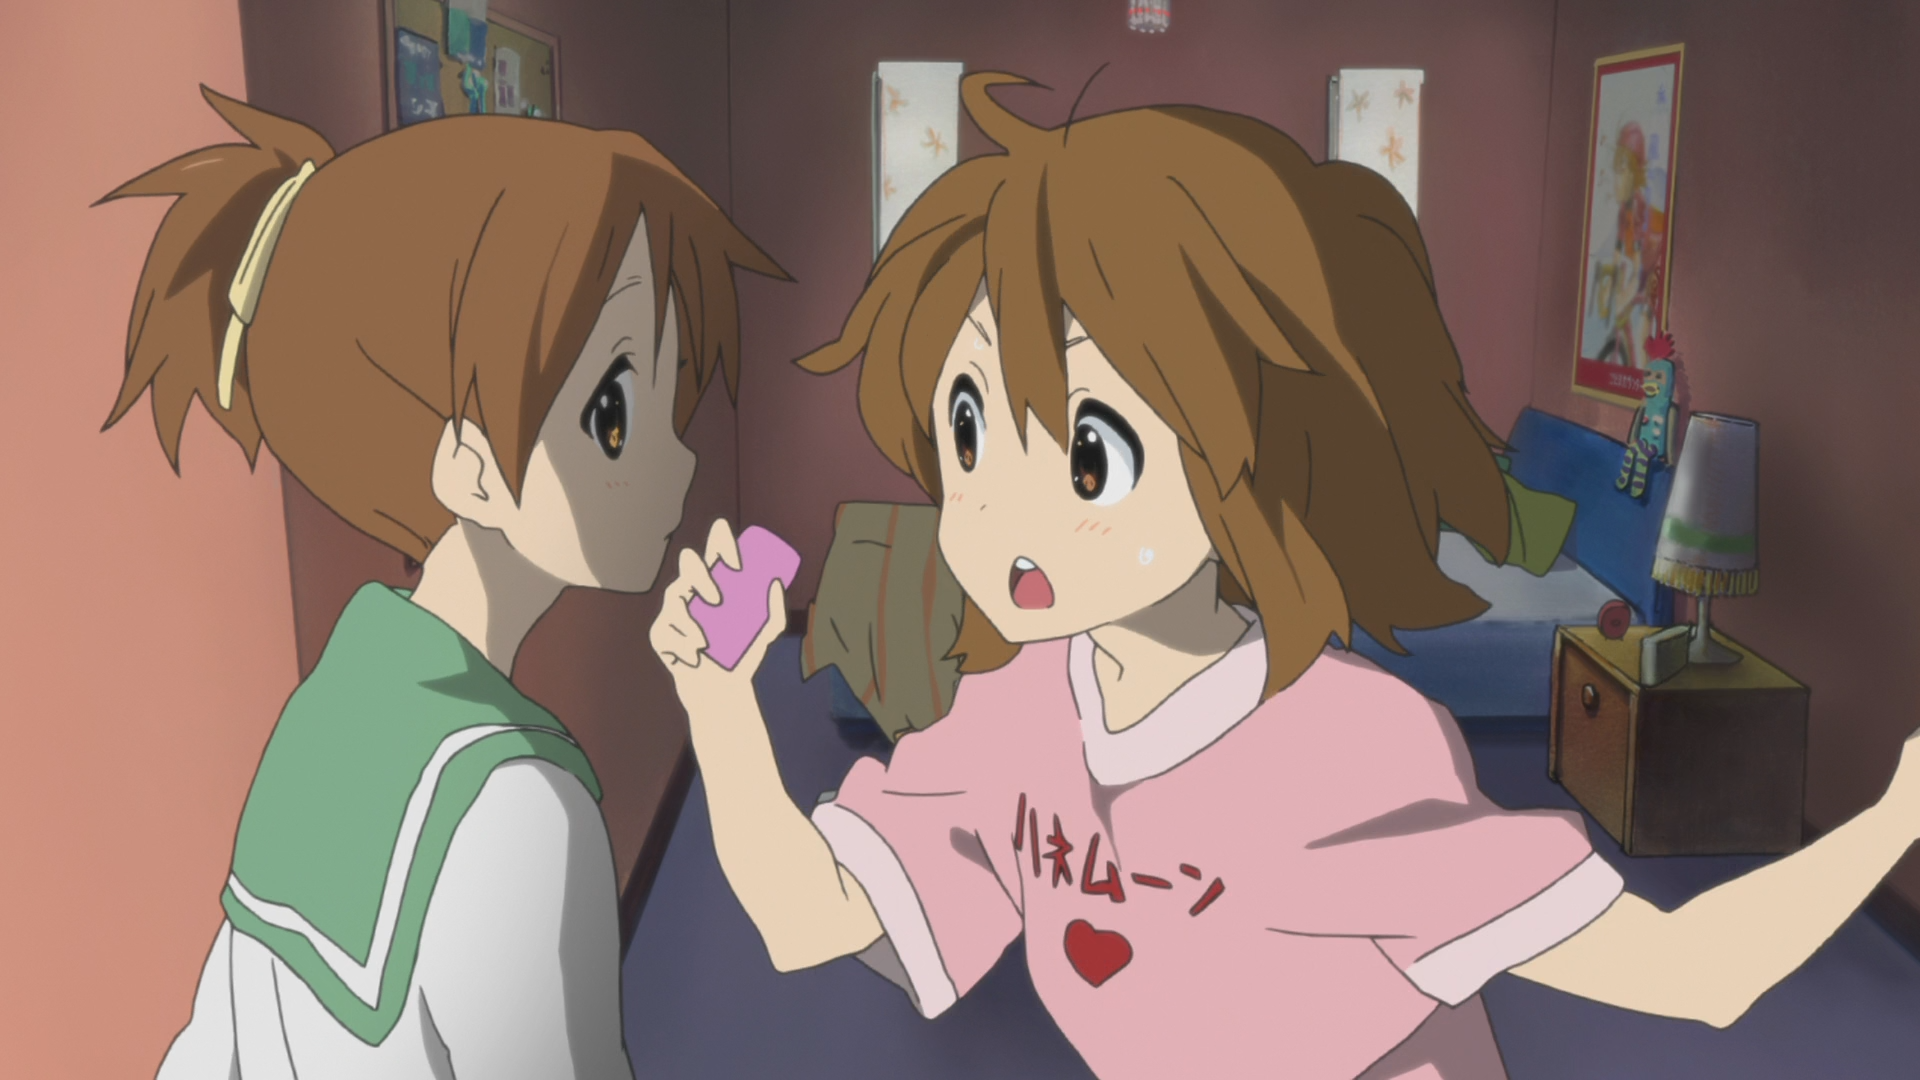 Yui Hirasawa Is The Glue That Holds K-ON! Together - Crunchyroll News